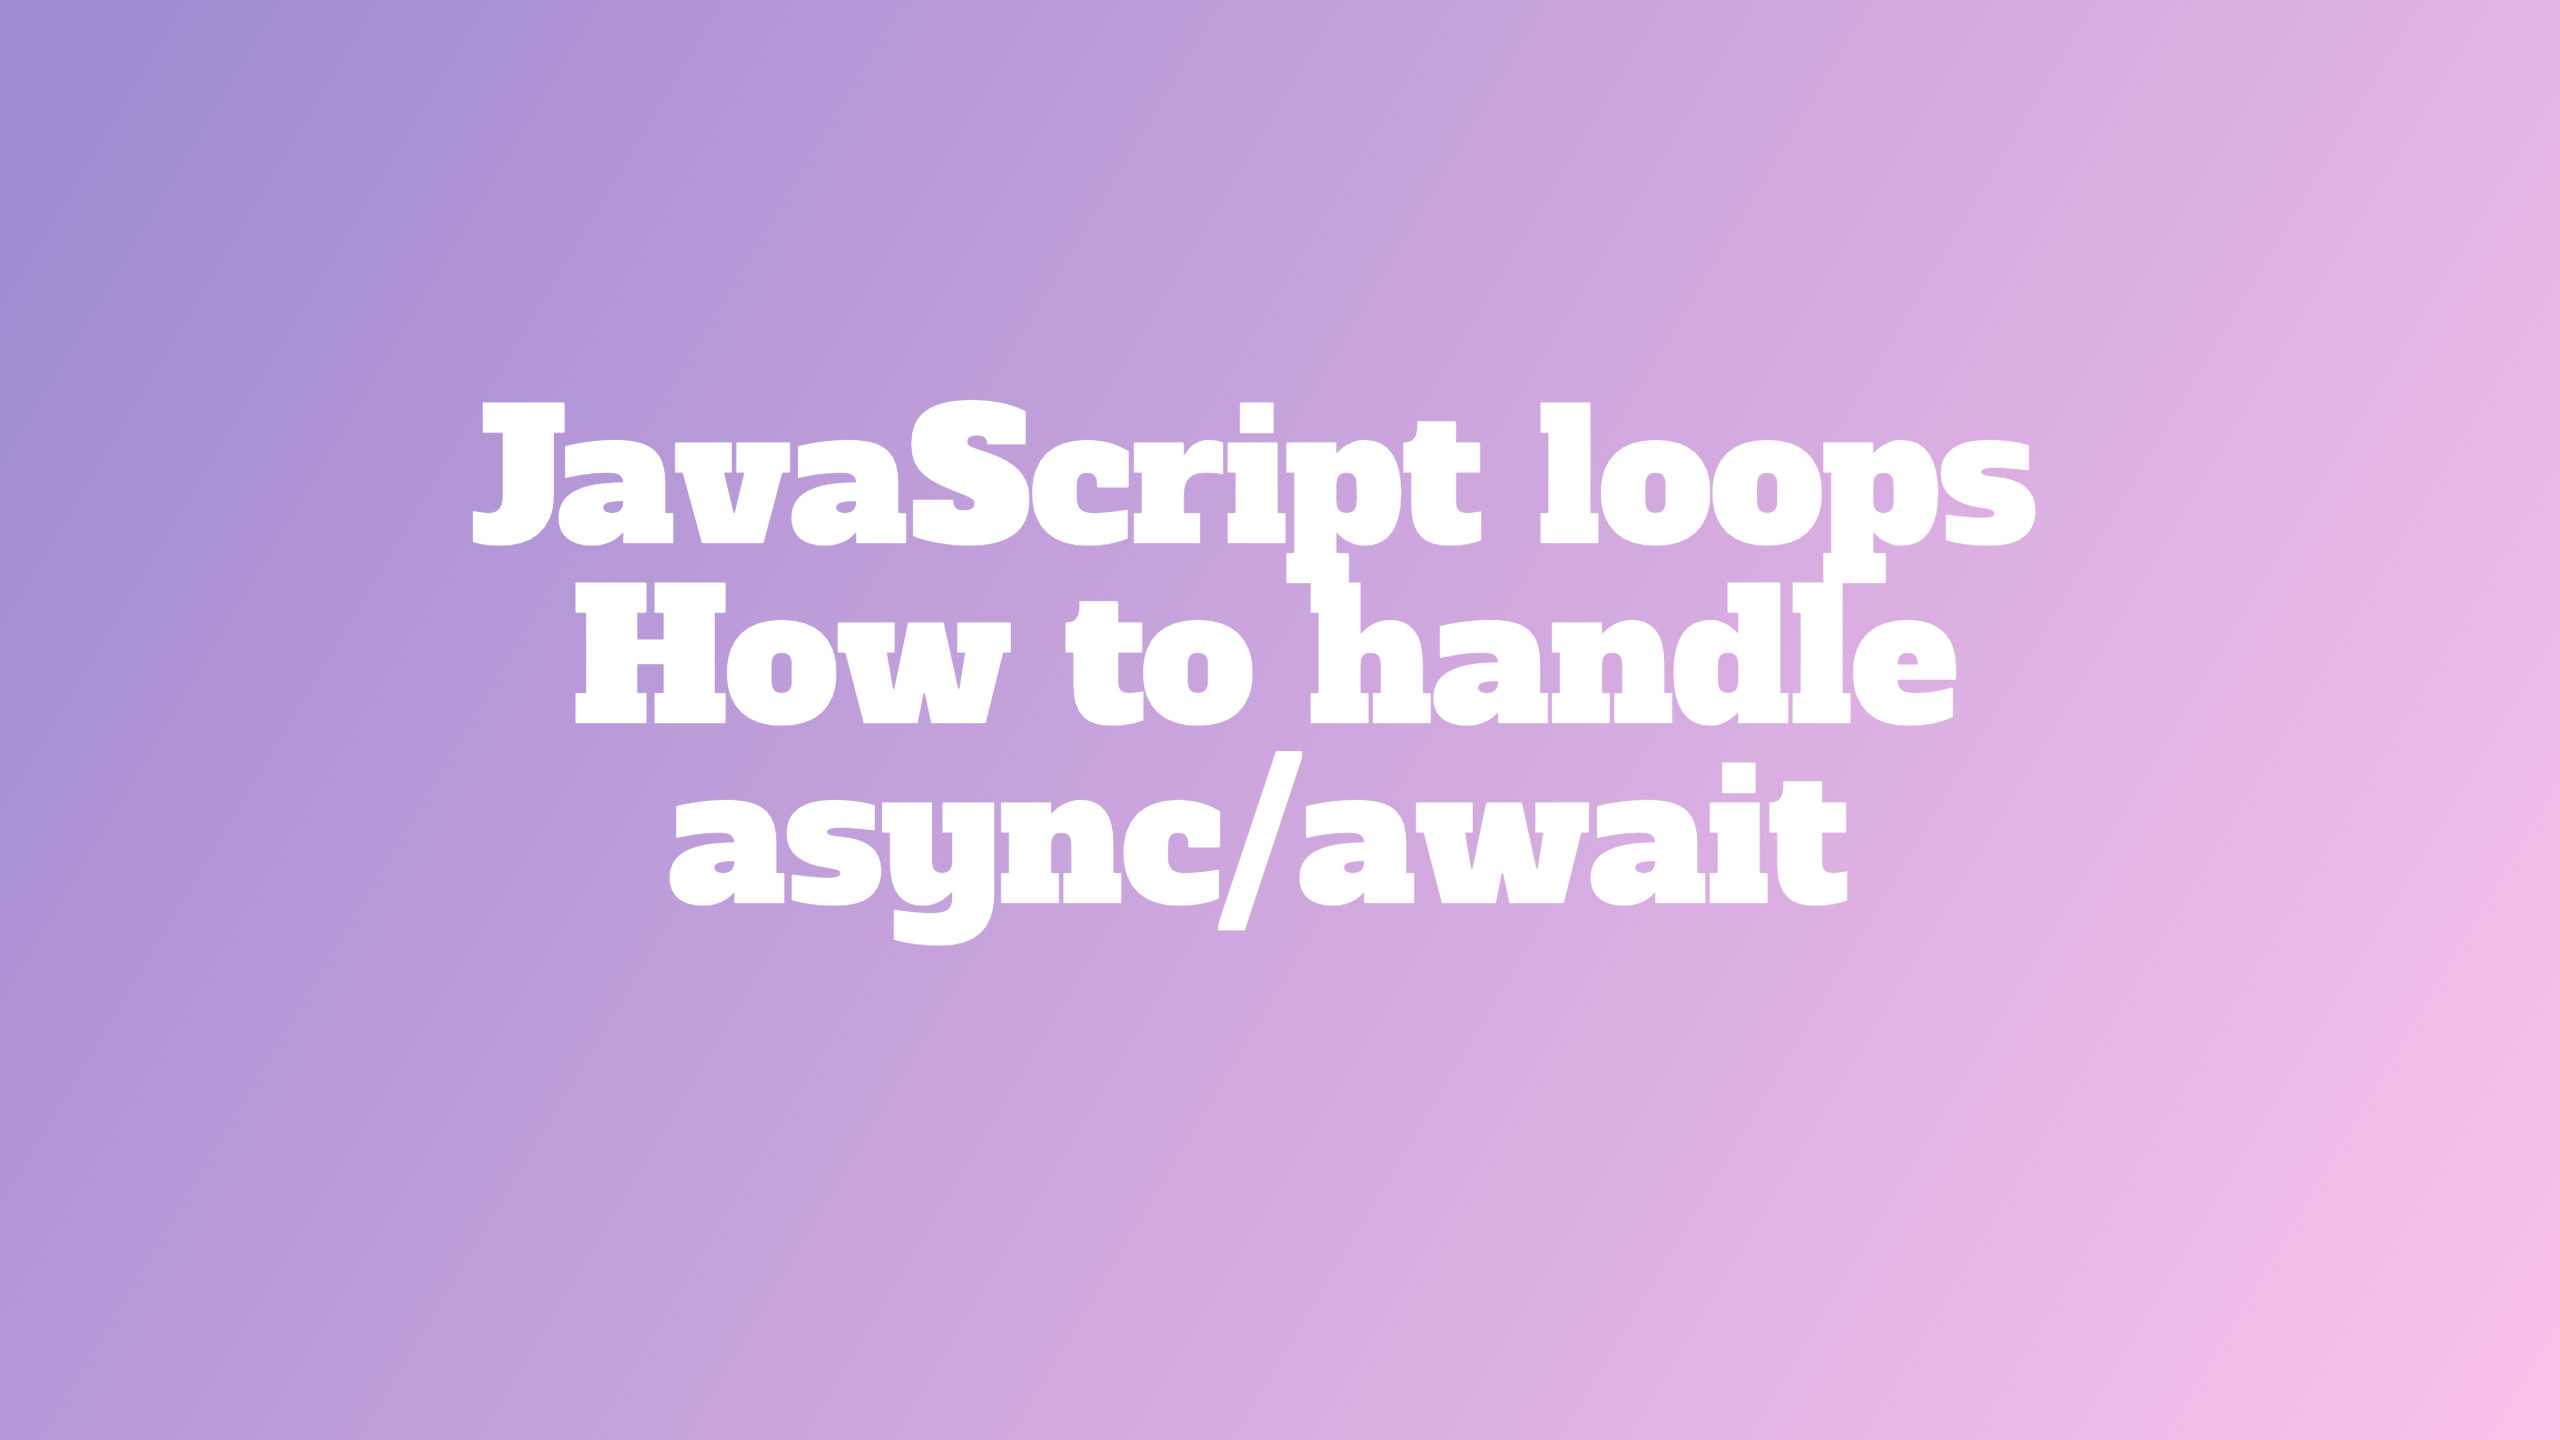 JavaScript loops - how to handle async/await cover image